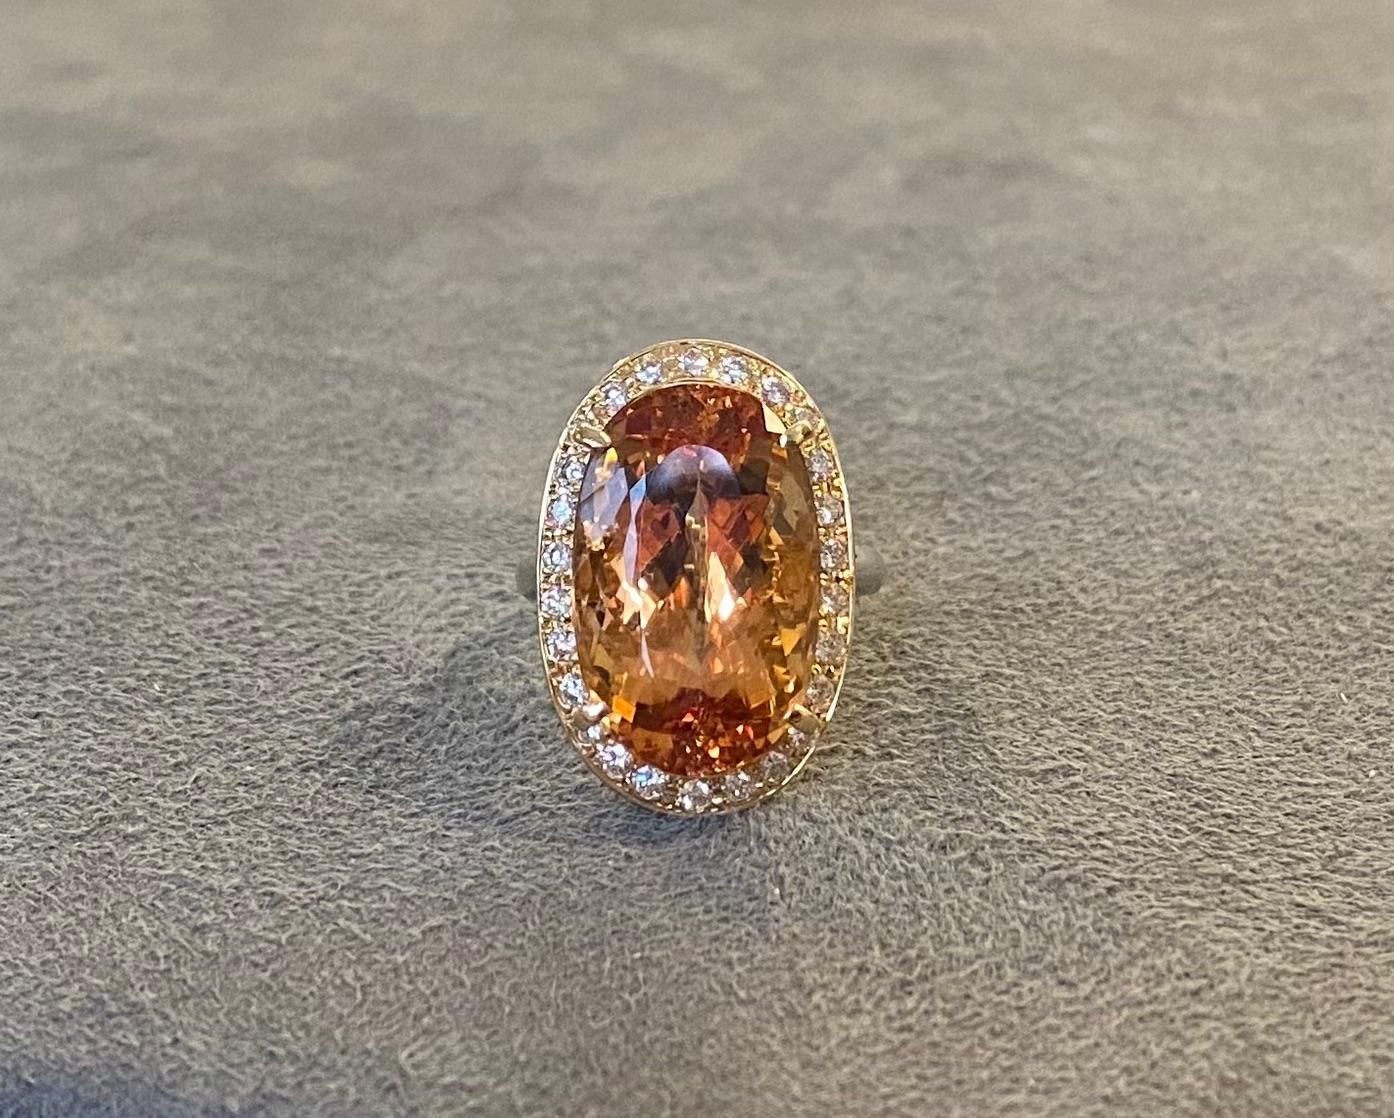 A beautiful Imperial Topaz of 18.46ct, set with diamonds in platinum and 18k yellow gold. 